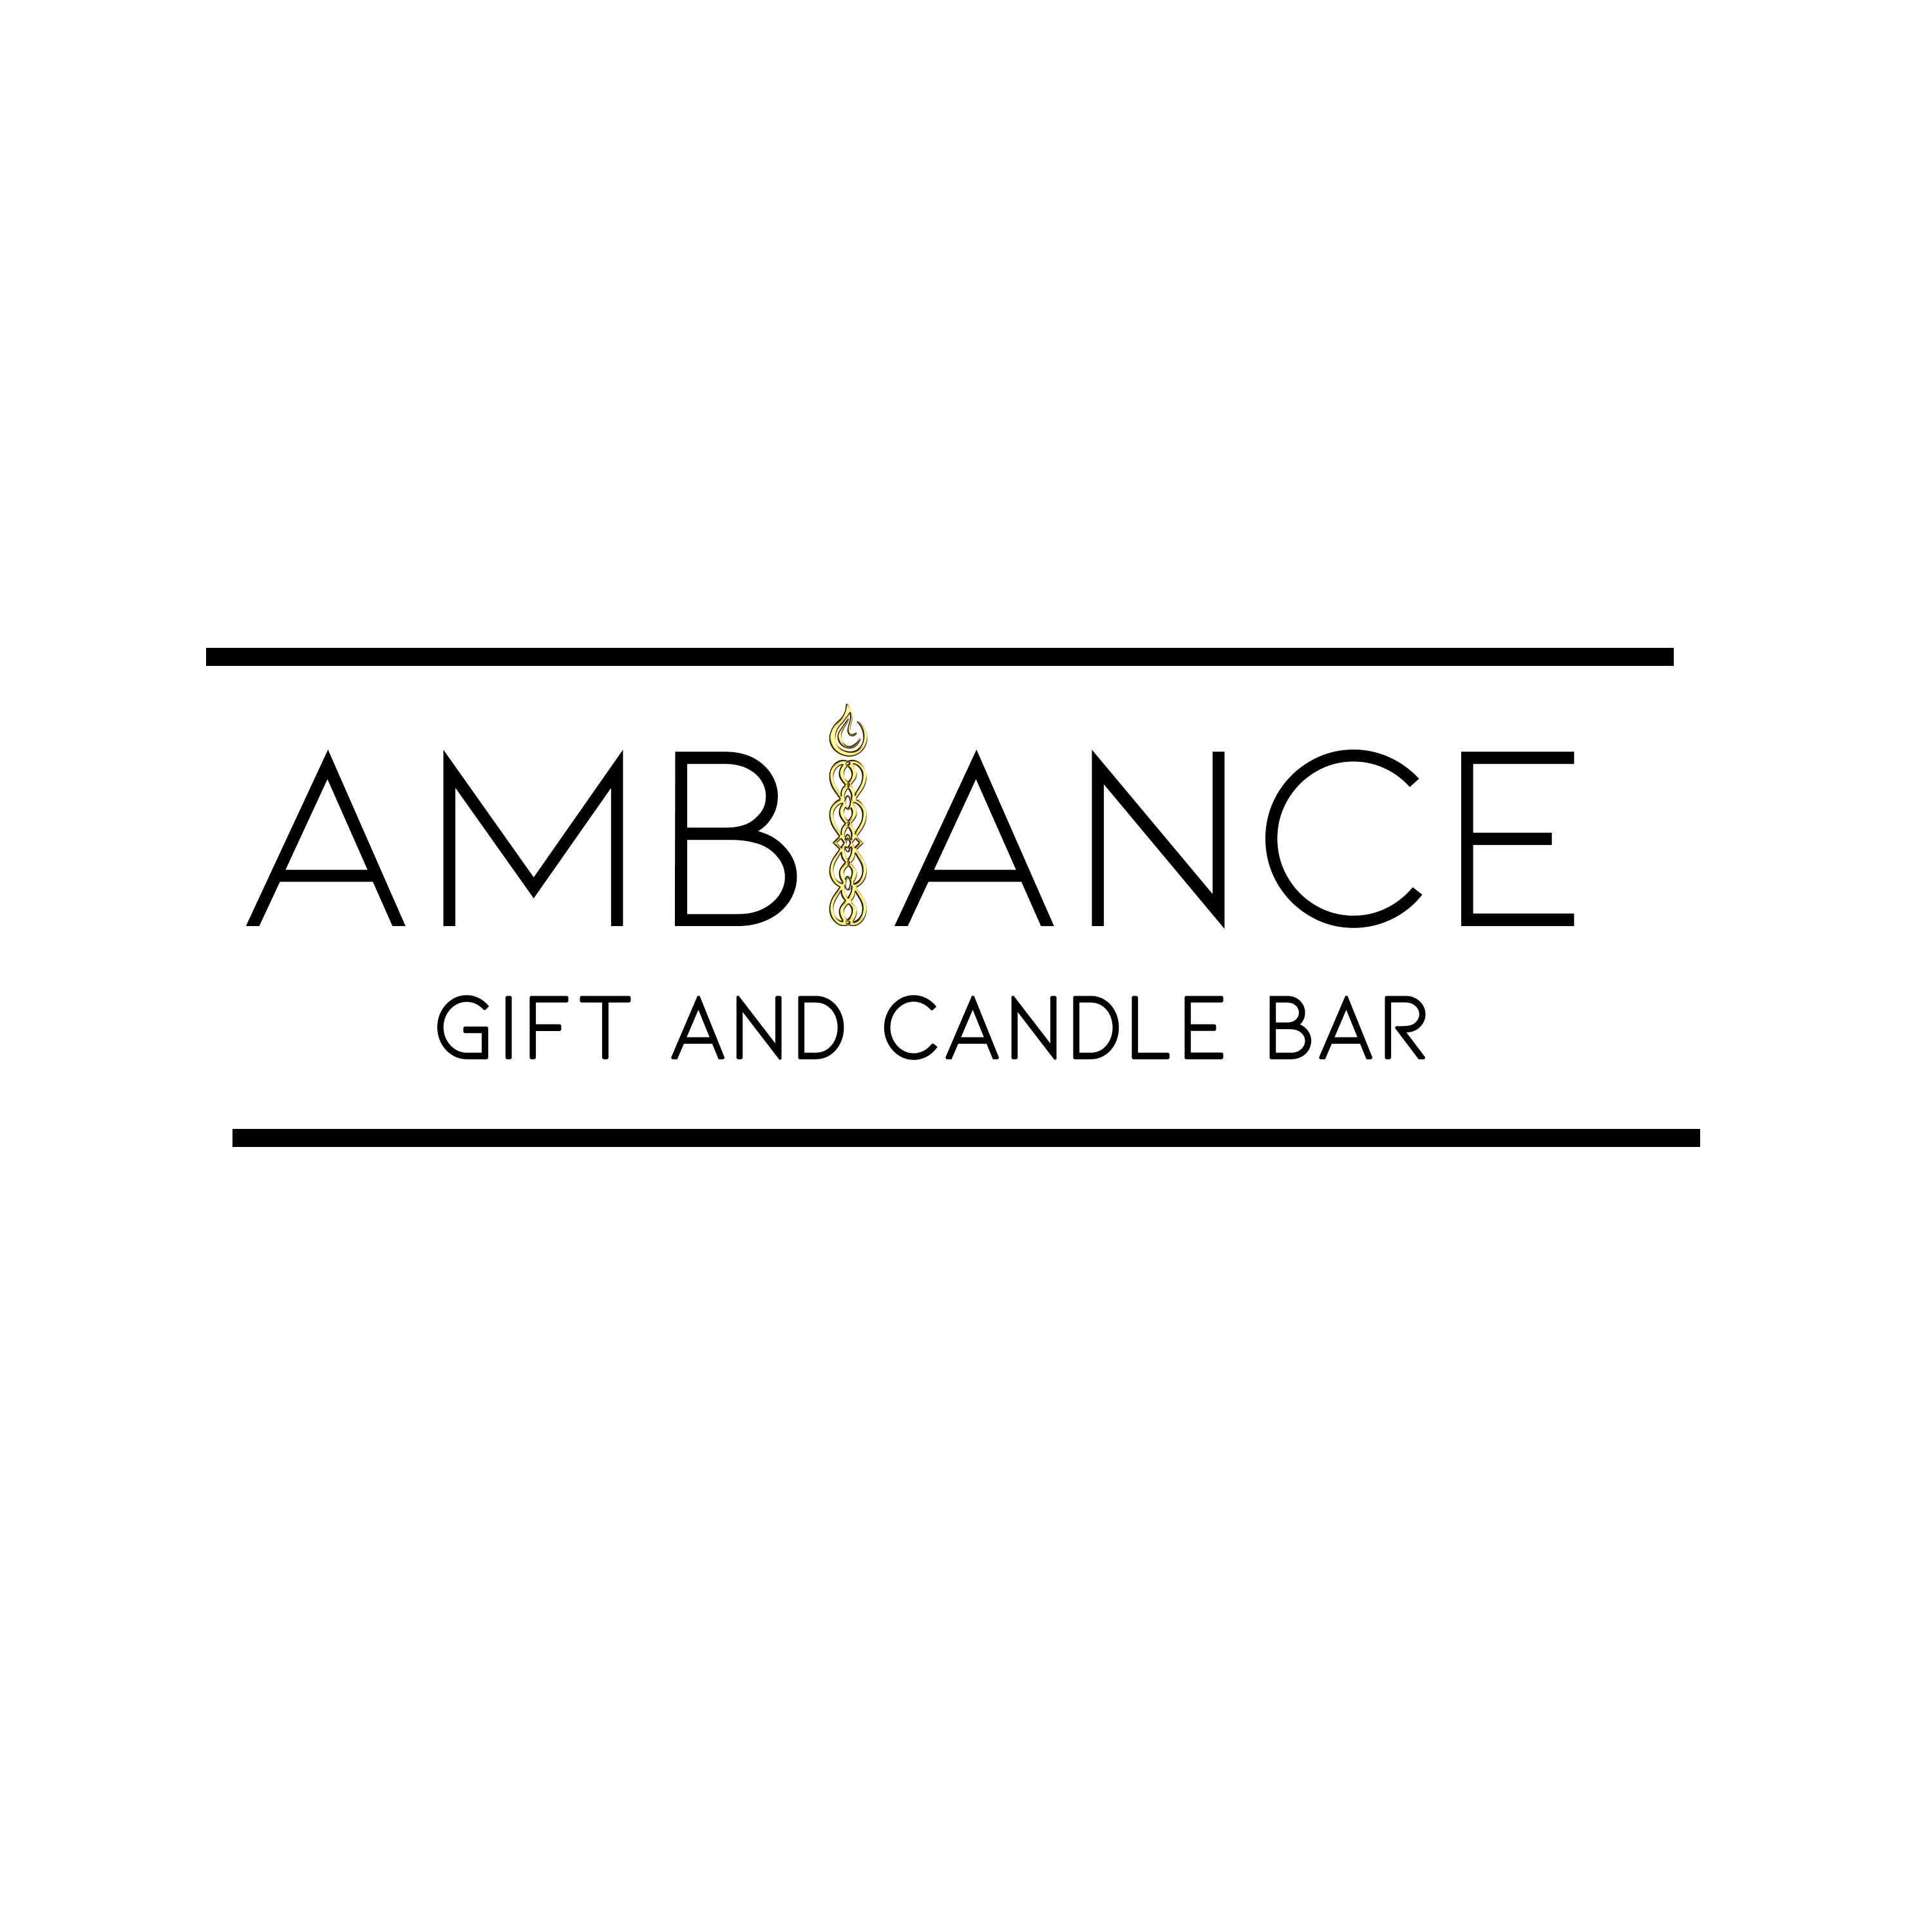 Ambiance Gift and Candle Bar